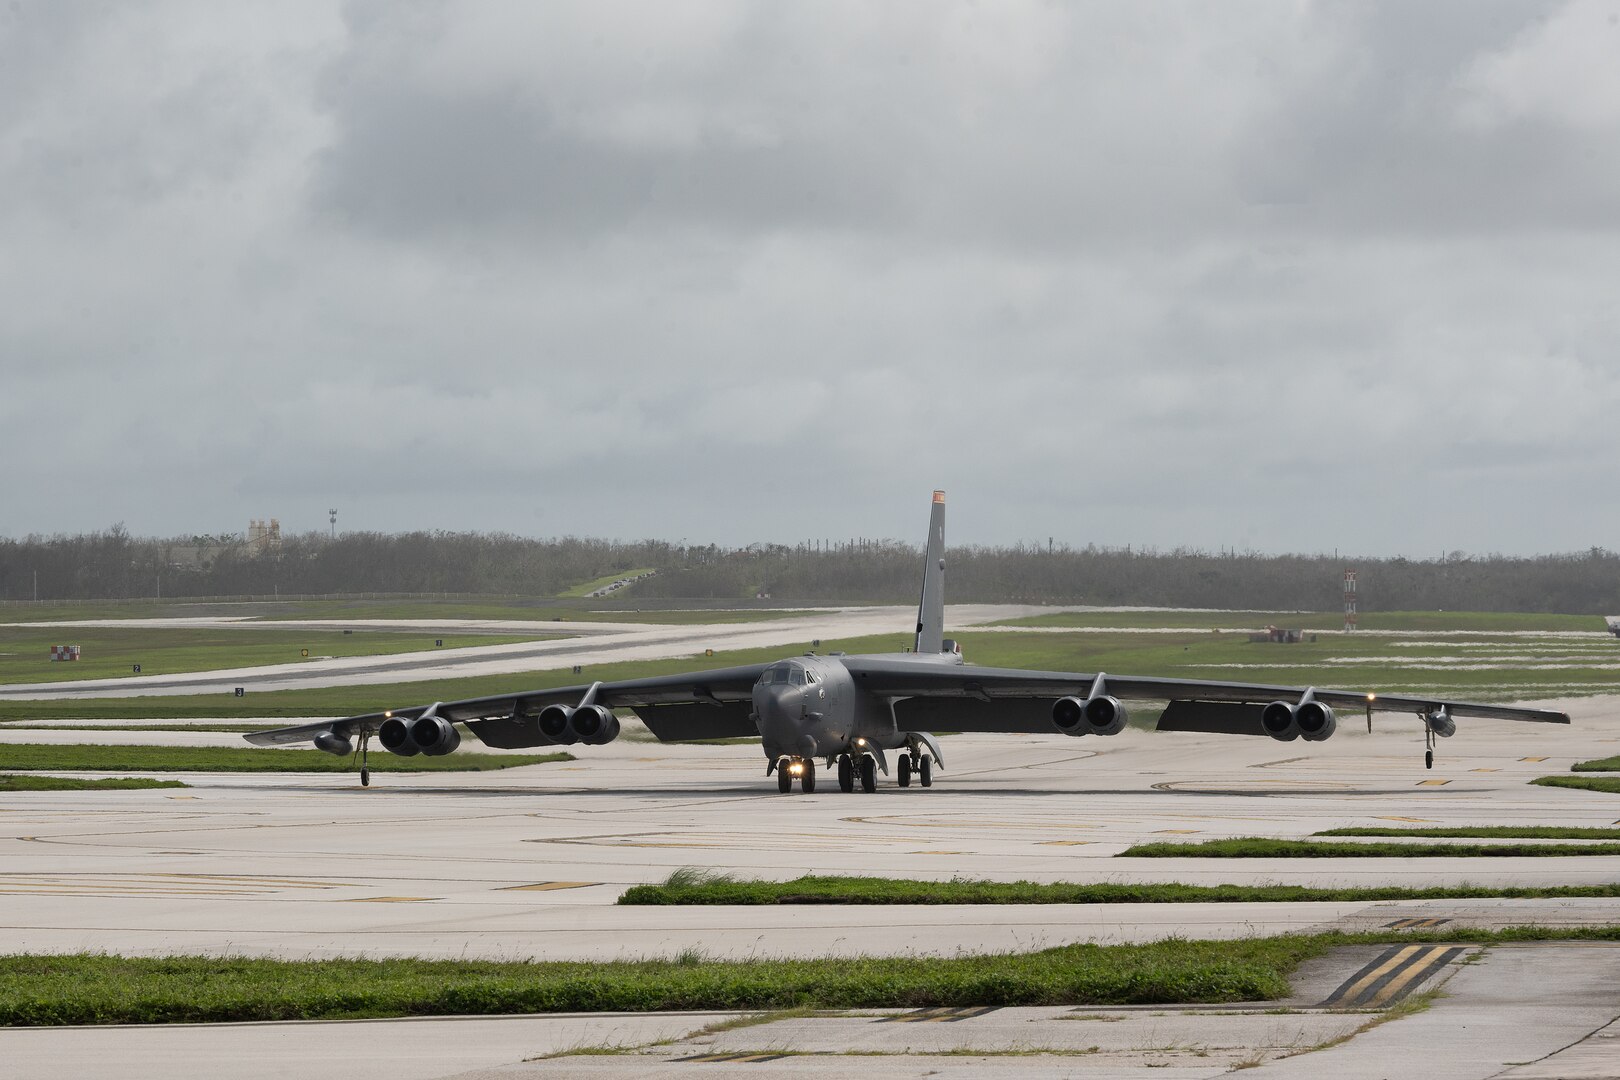 A U.S. Air Force B-52H Stratofortress assigned to the 23rd Bomb Squadron at Minot Air Force Base, North Dakota, taxis on the runway upon landing at Andersen Air Force Base, Guam, for a Bomber Task Force deployment, June 12, 2023. Strategic bomber missions like this enhance the readiness and training necessary to respond to any potential crisis or challenge across the globe. (U.S. Air Force photo by Tech. Sgt. Zade Vadnais)